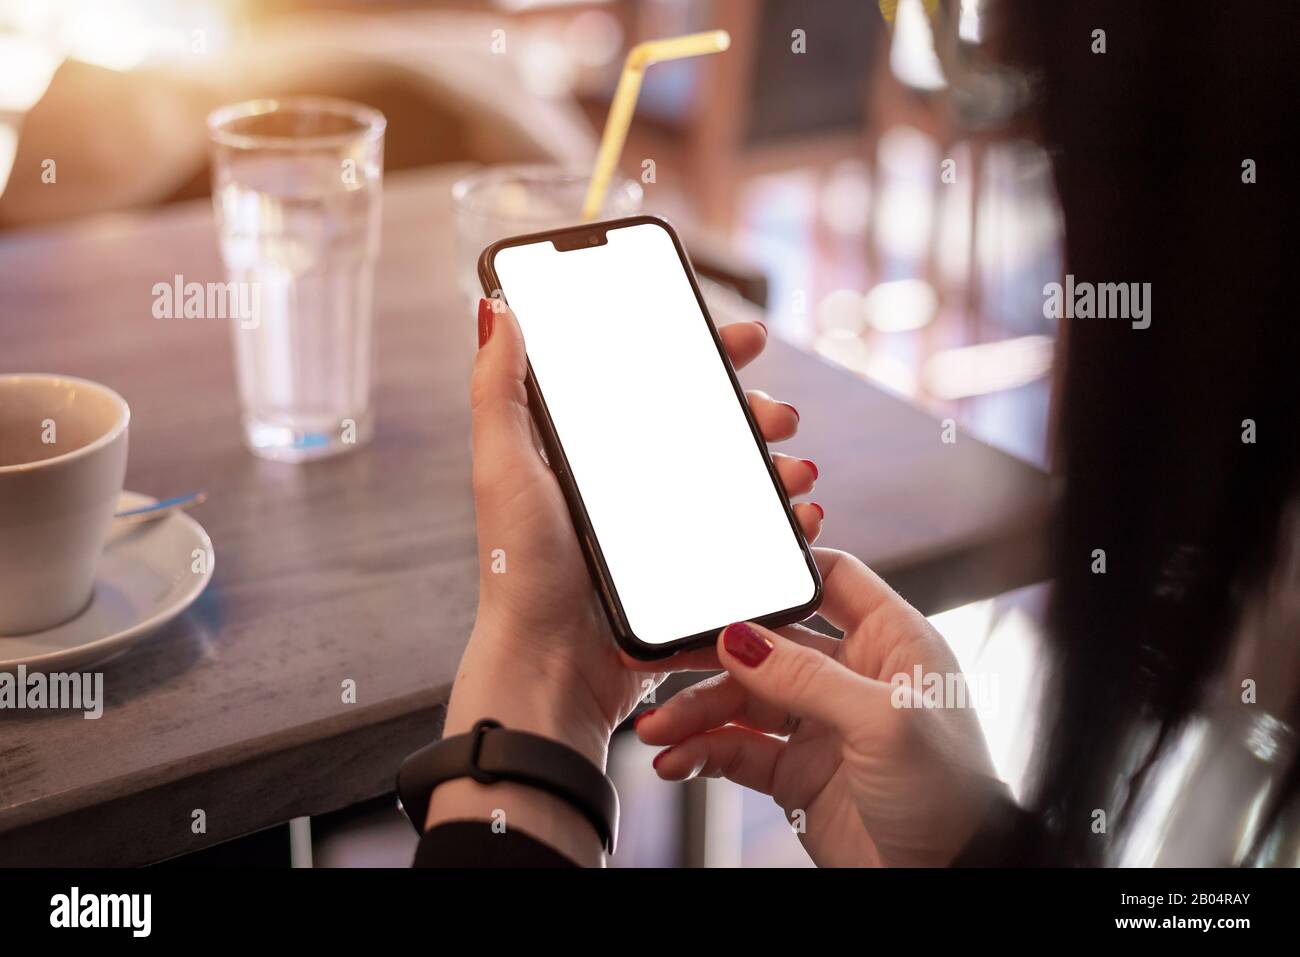 Smart phone mockup in woman hands. Concept of use phone app and smart bracelet Stock Photo